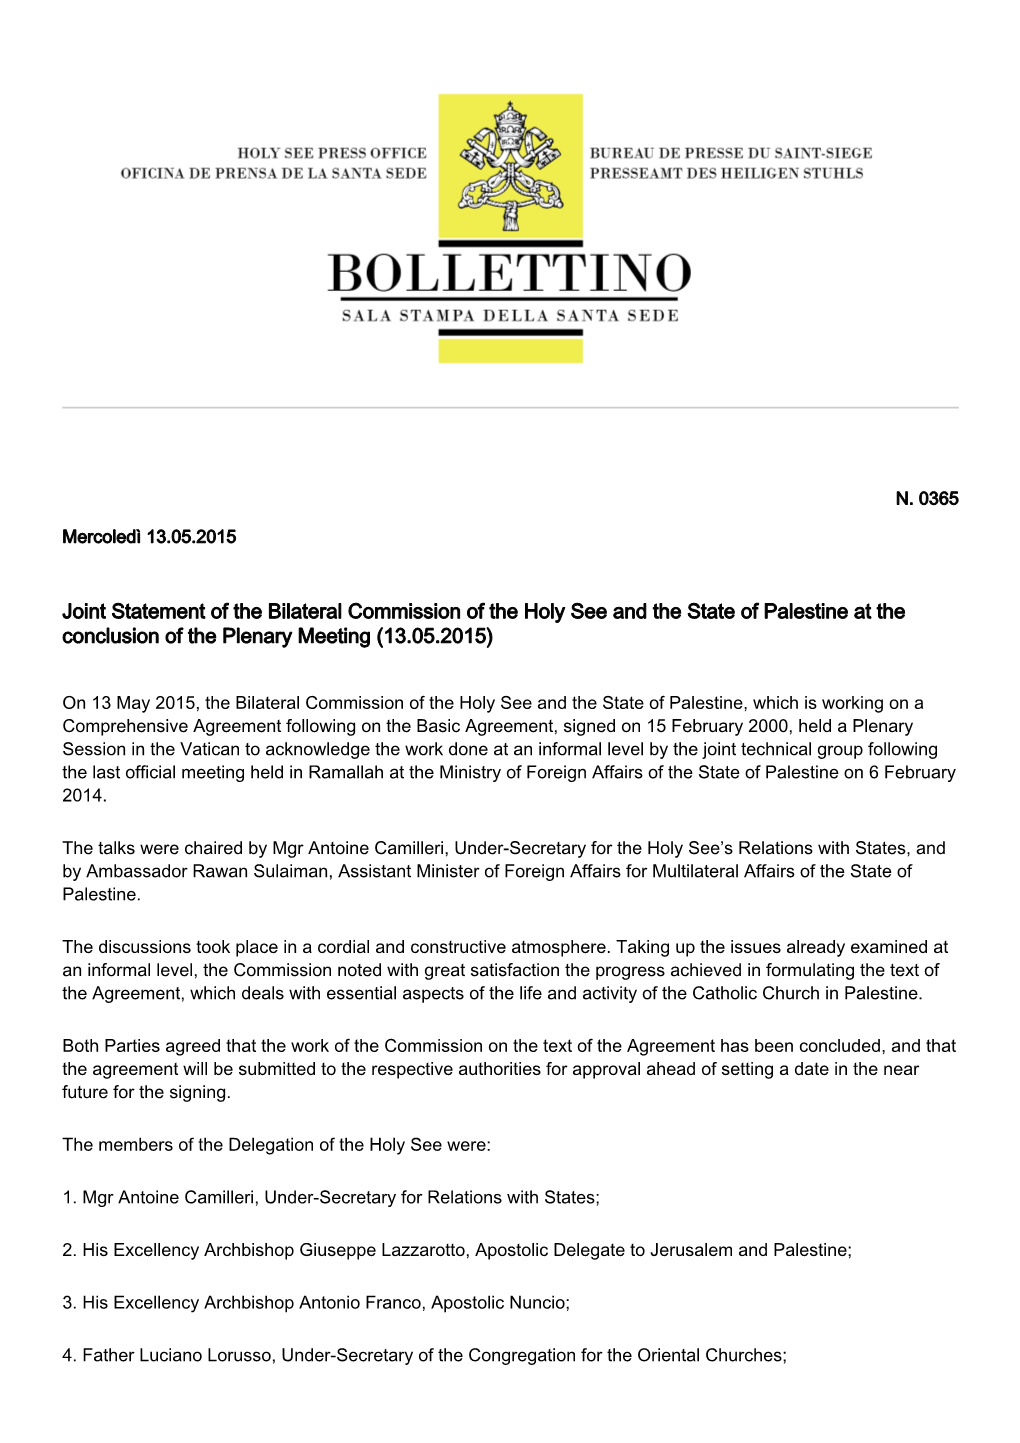 Joint Statement of the Bilateral Commission of the Holy See and the State of Palestine at the Conclusion of the Plenary Meeting (13.05.2015)